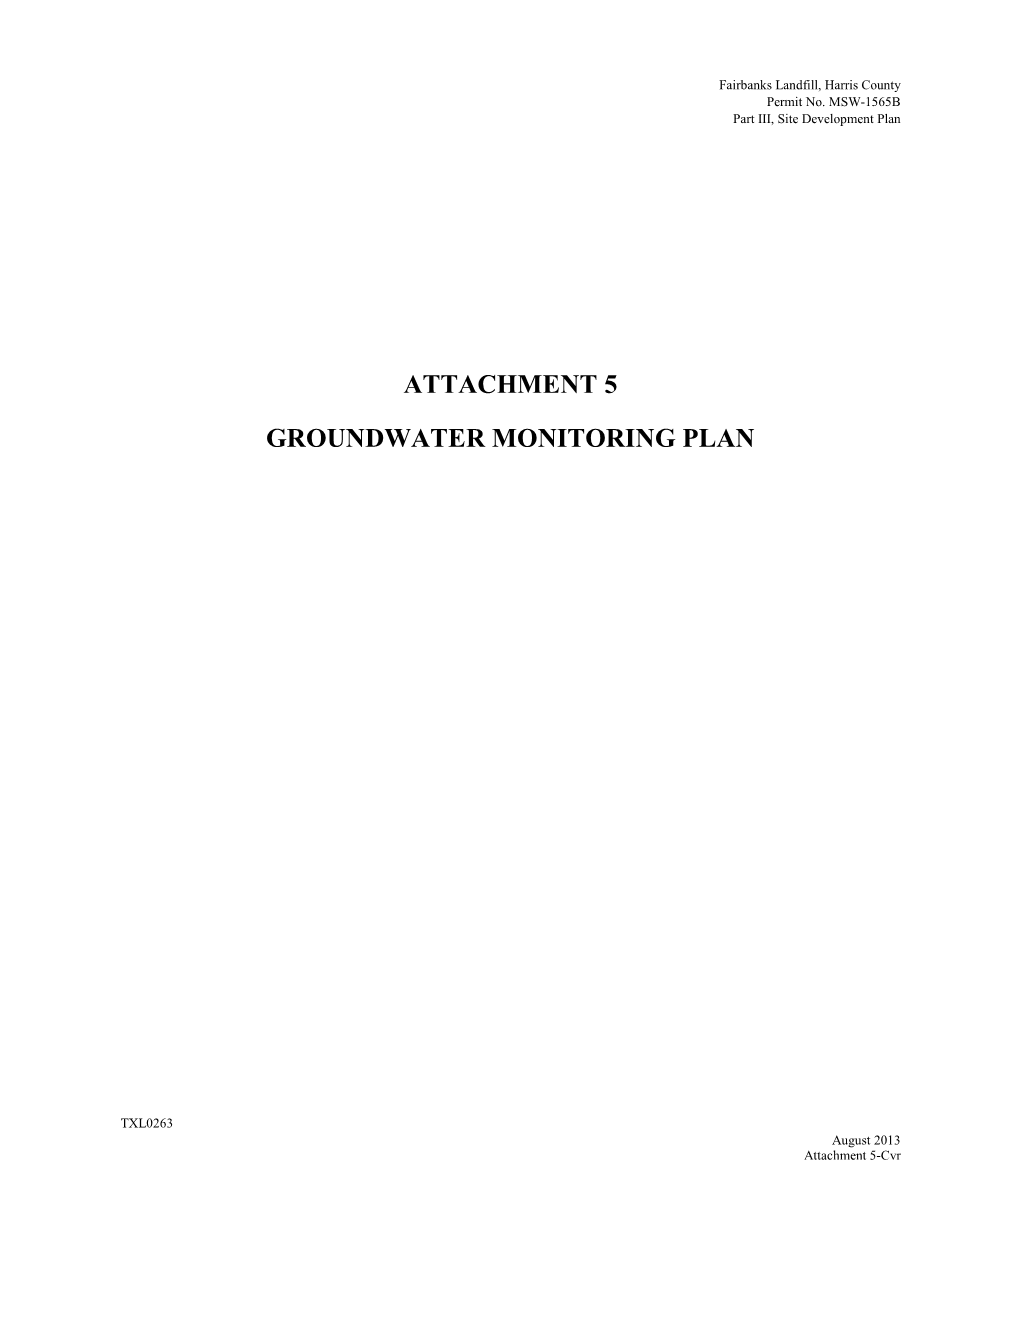 Attachment 5 Groundwater Monitoring Plan